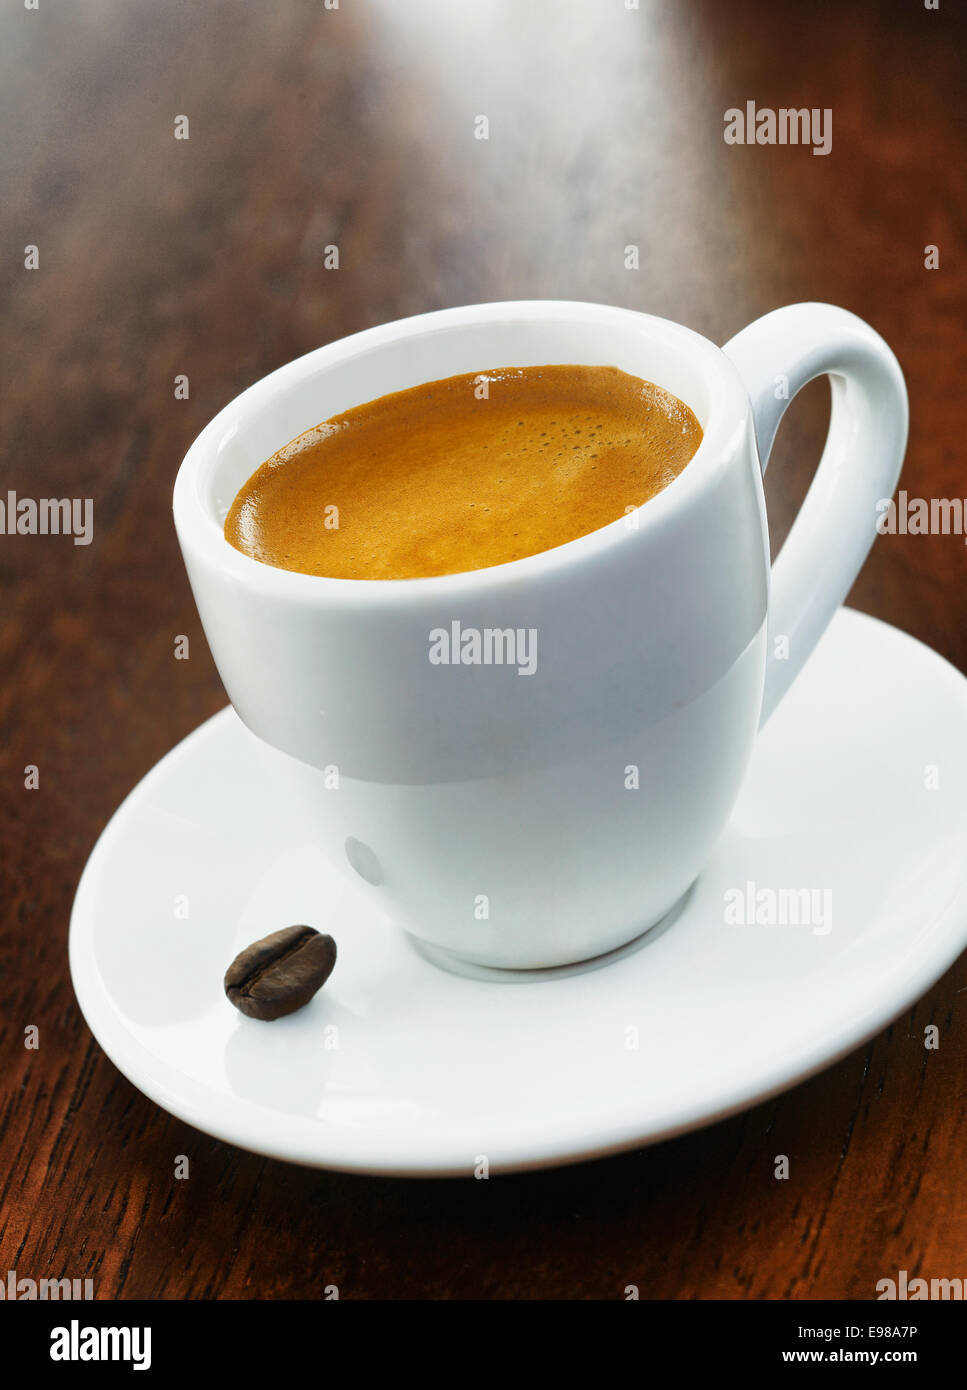 A full white coffee cup with a single coffee bean on the saucer, on a dark wood background Stock Photo